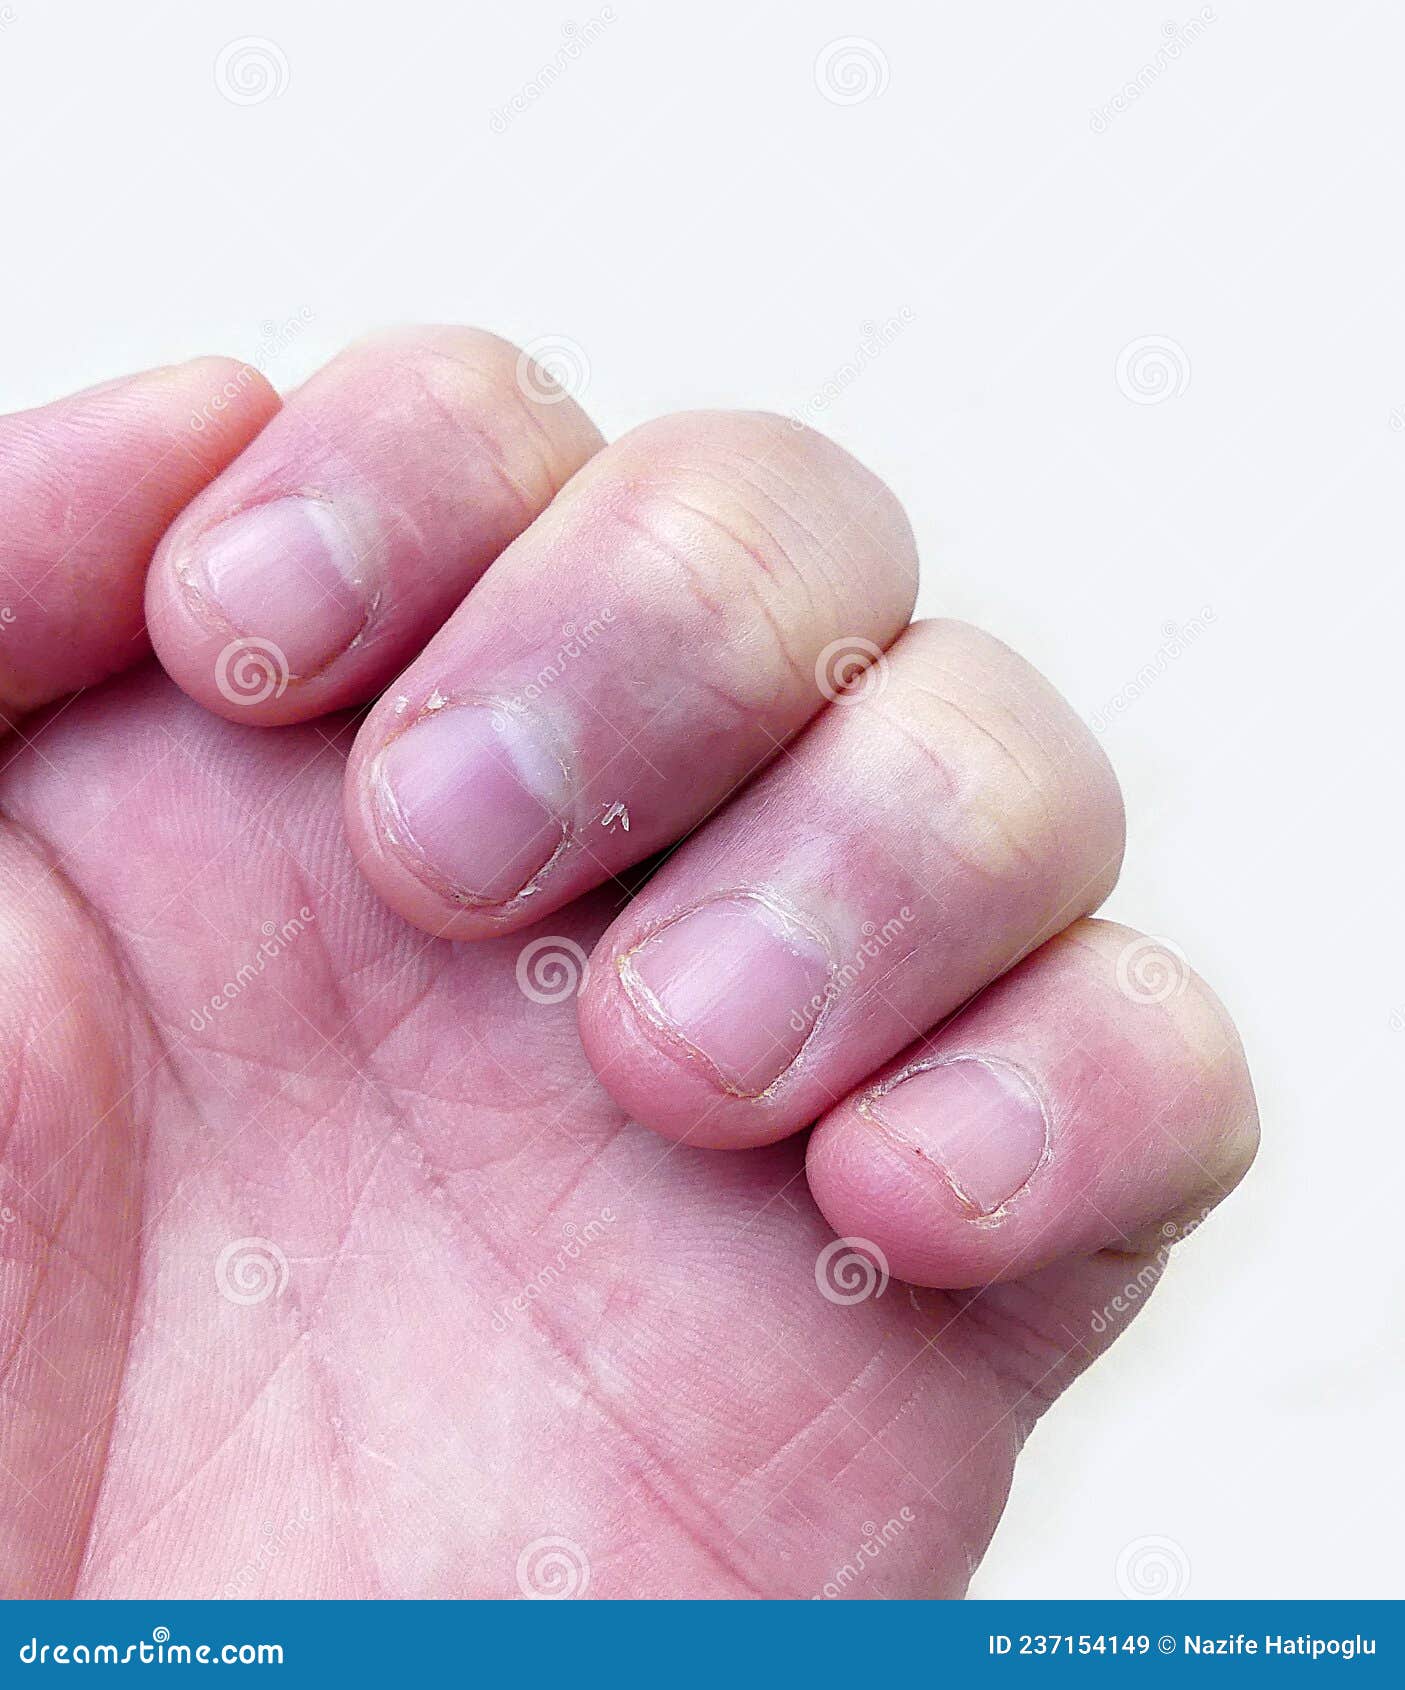 Skin Peeling on Finger Nails, Vitamin C Deficiency and Nail Skin Diseases  Stock Image - Image of glass, beauty: 237154149